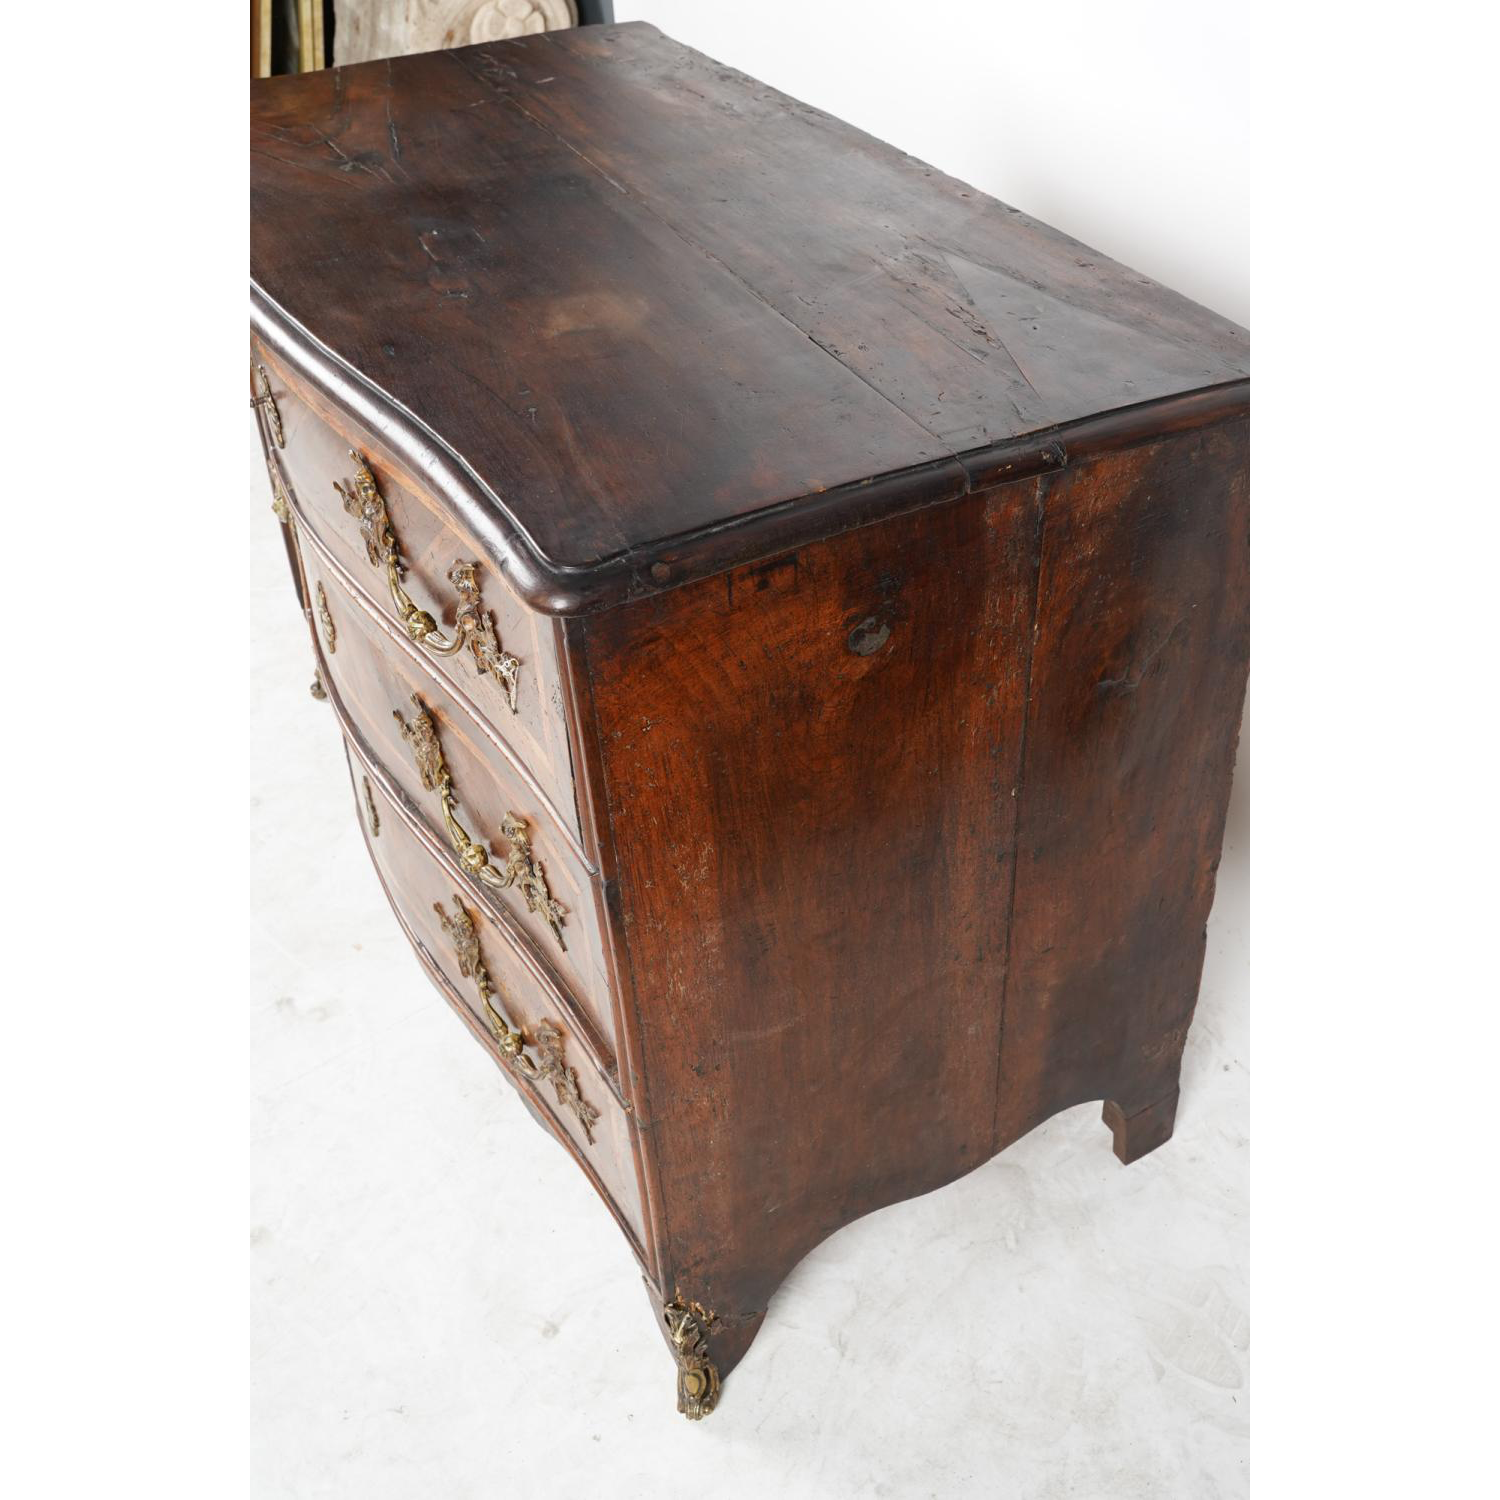 AF4-199: ANTIQUE 18TH CENTURY FRENCH LOUIS XV INLAID MARQUETRY CHEST OF DRAWERS